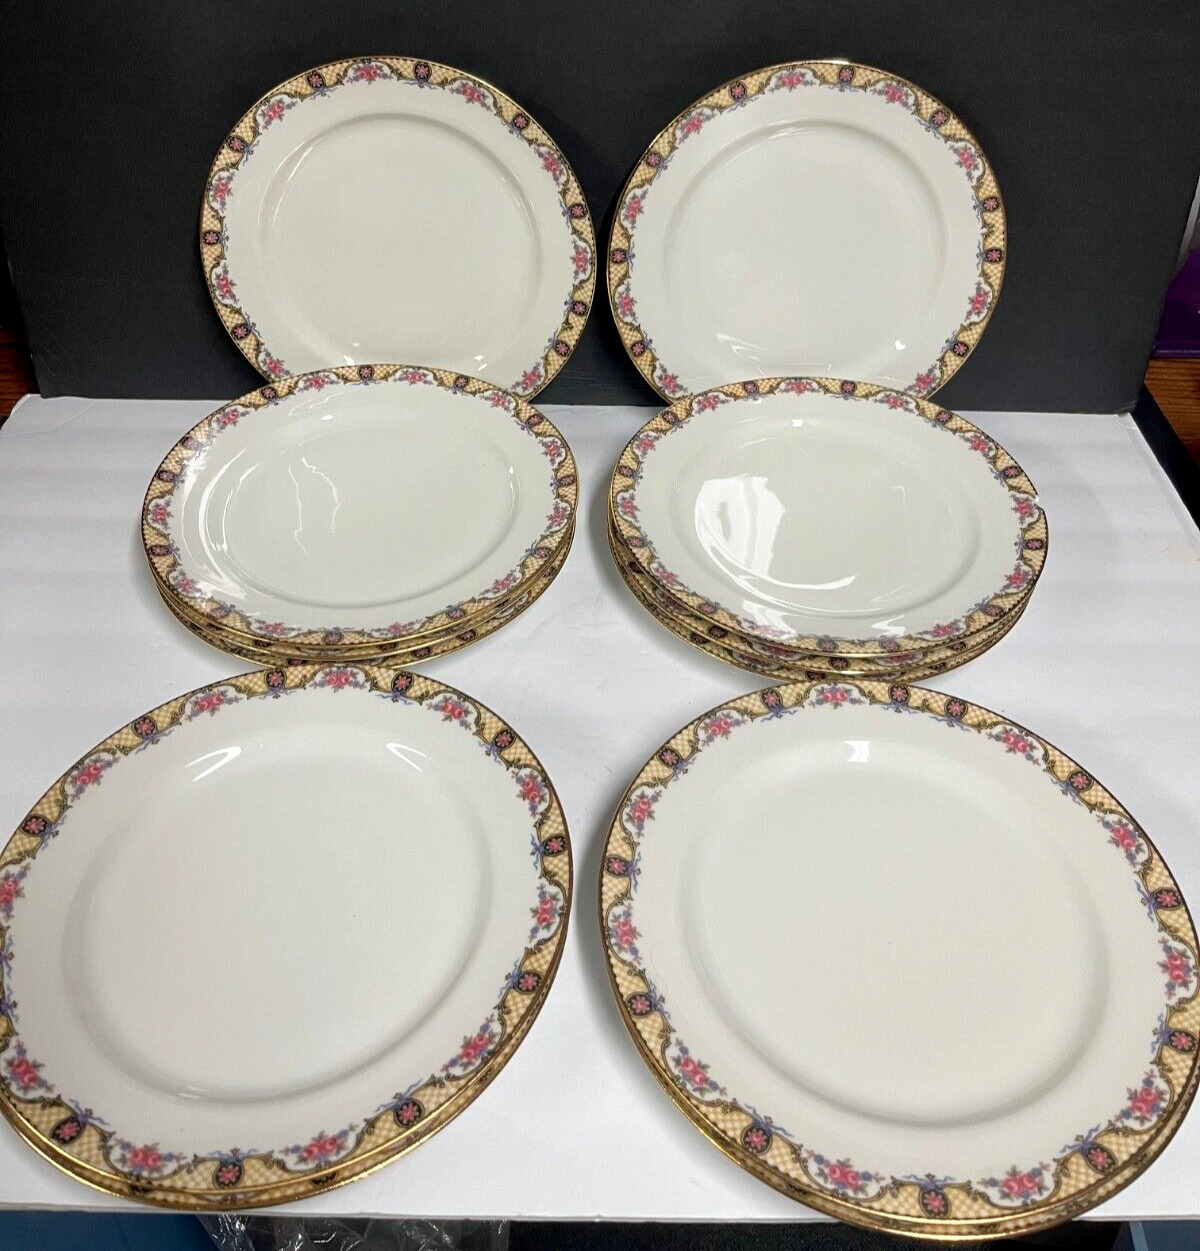 Antique Jean Pouyat Limoges lot of 12 dinner plates circa 1900s made in France